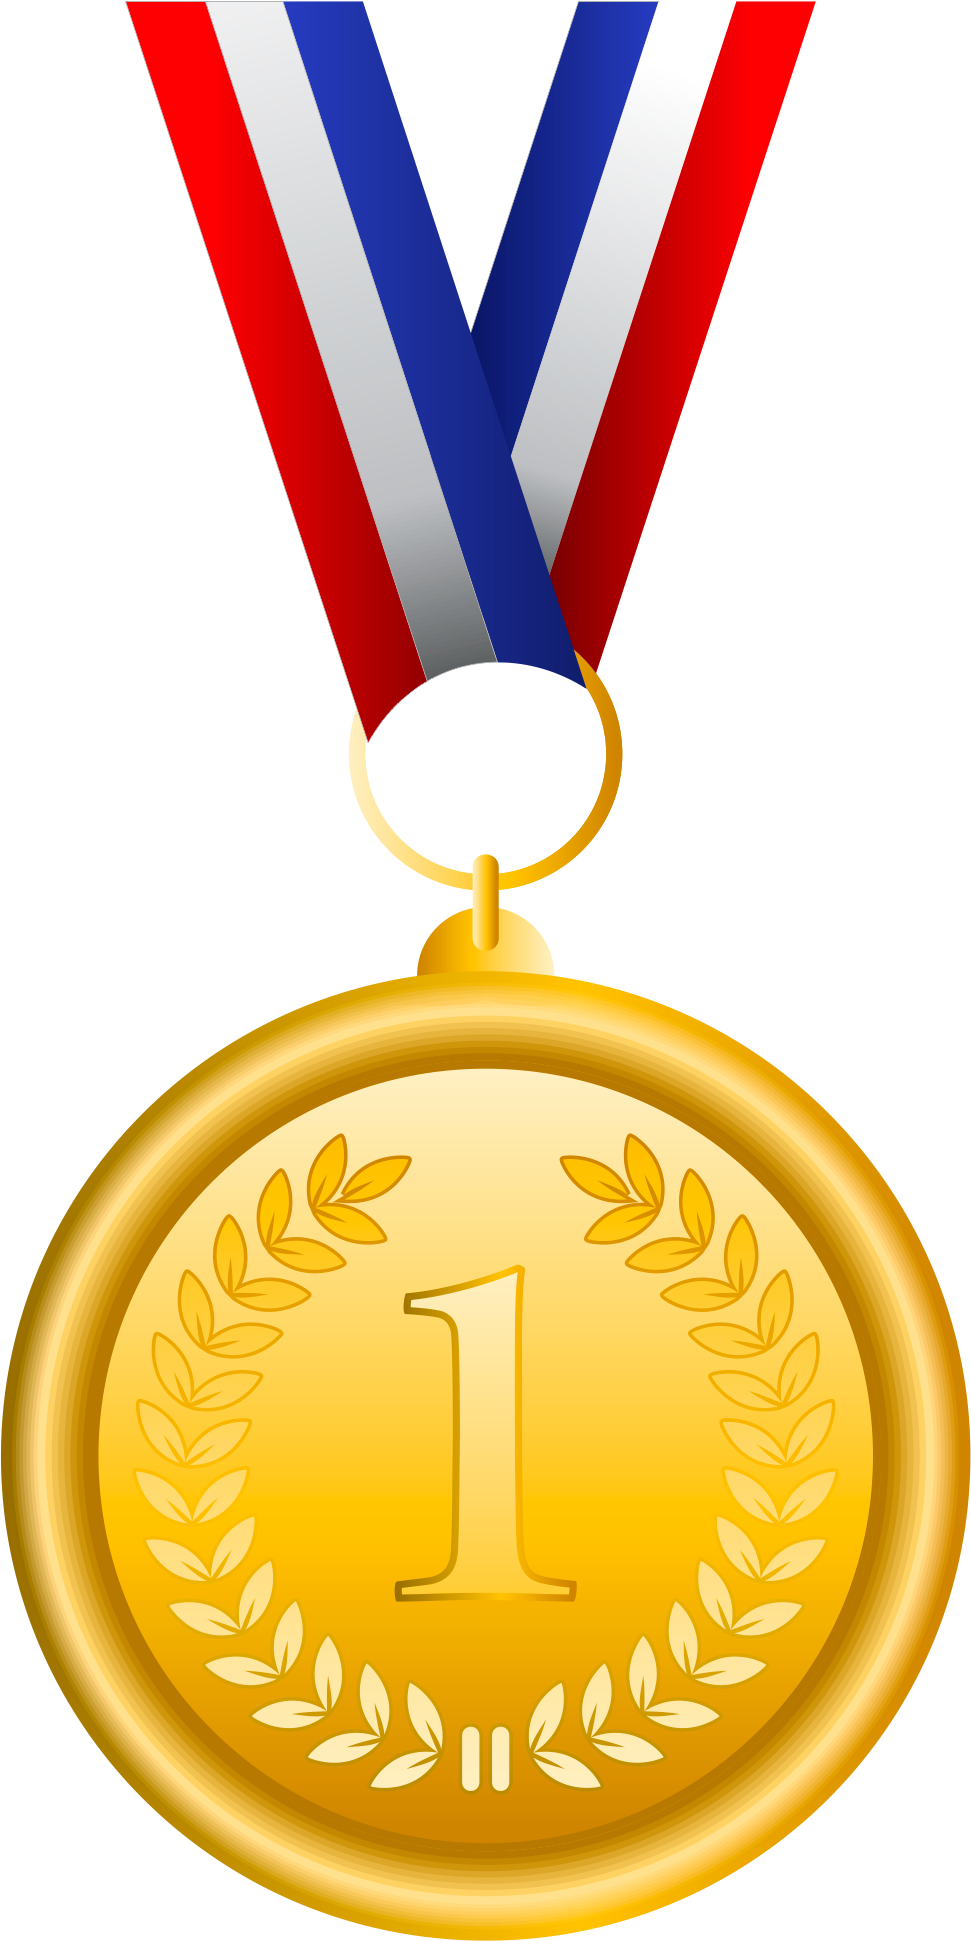 A Gold Medal With A Red White And Blue Ribbon